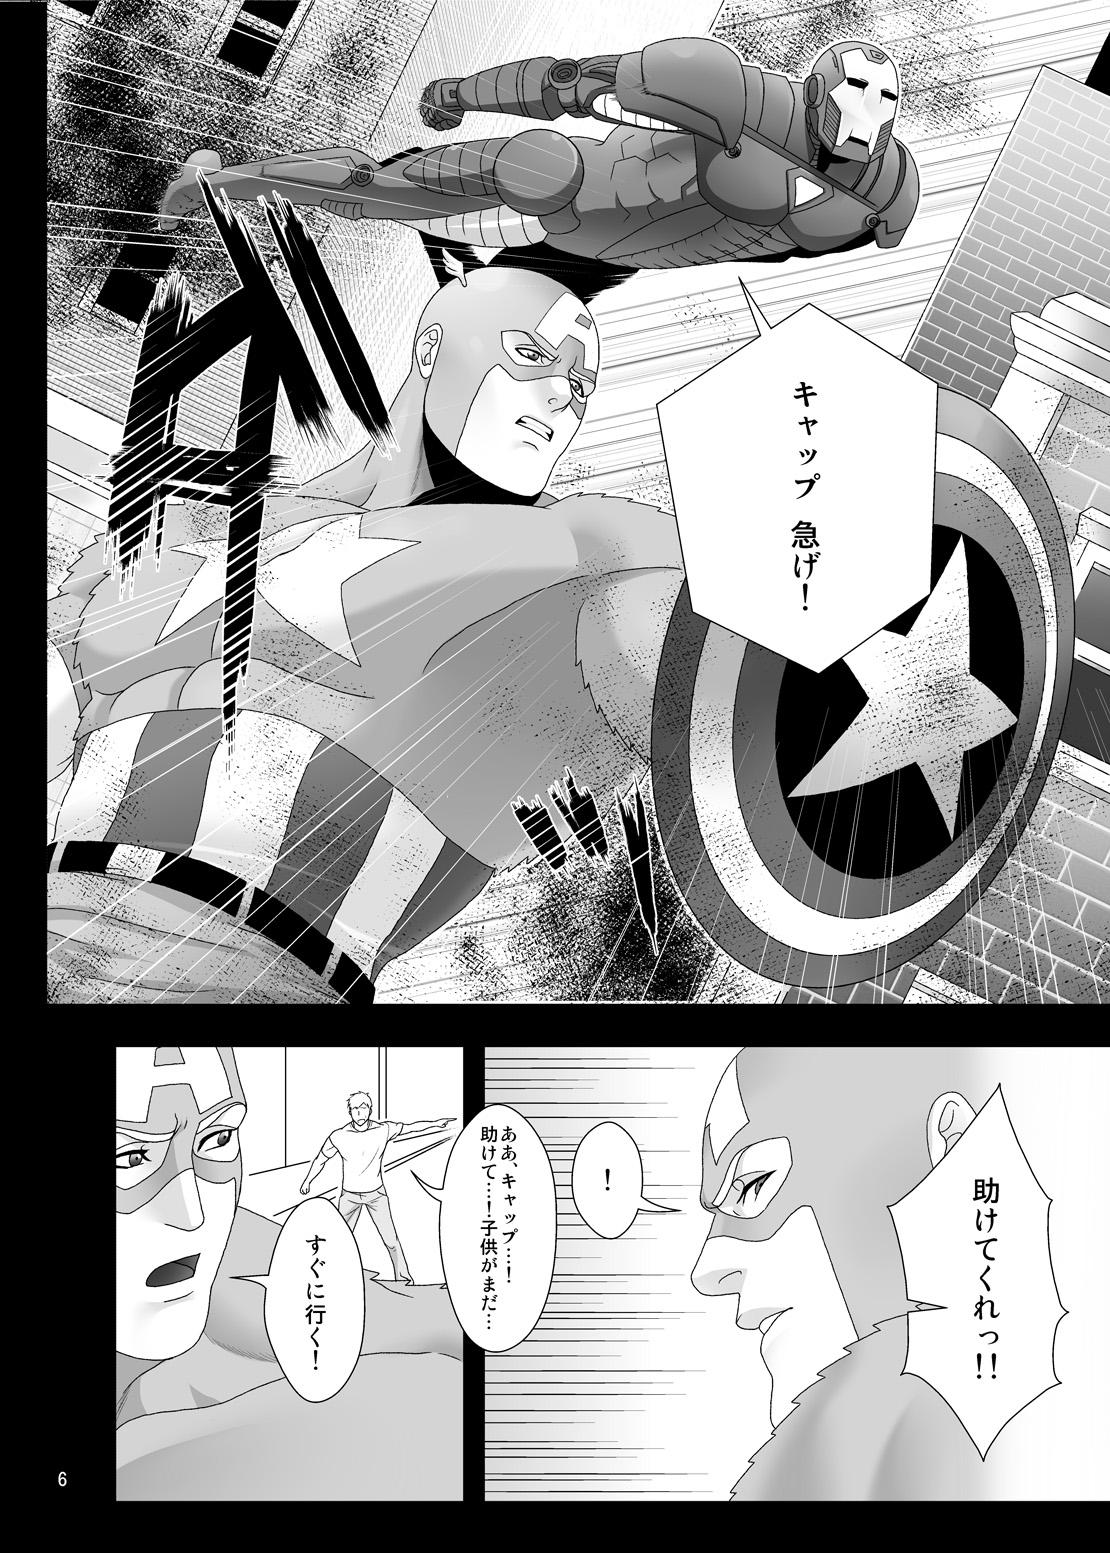 Cumshot from: your biggest fan - Avengers Analfucking - Page 5